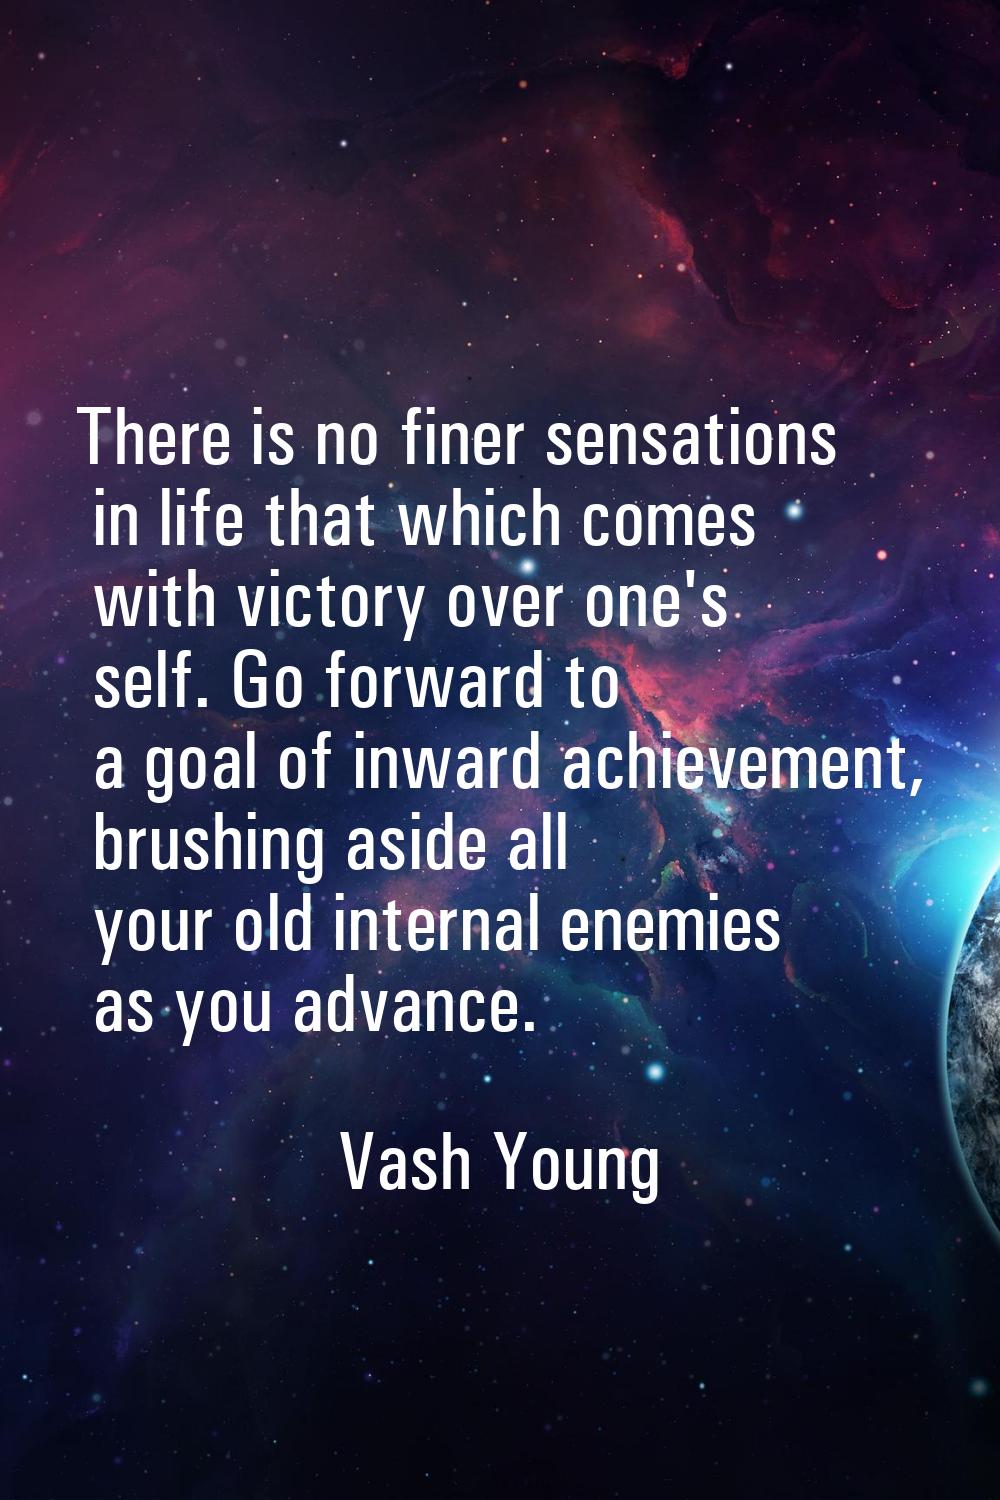 There is no finer sensations in life that which comes with victory over one's self. Go forward to a